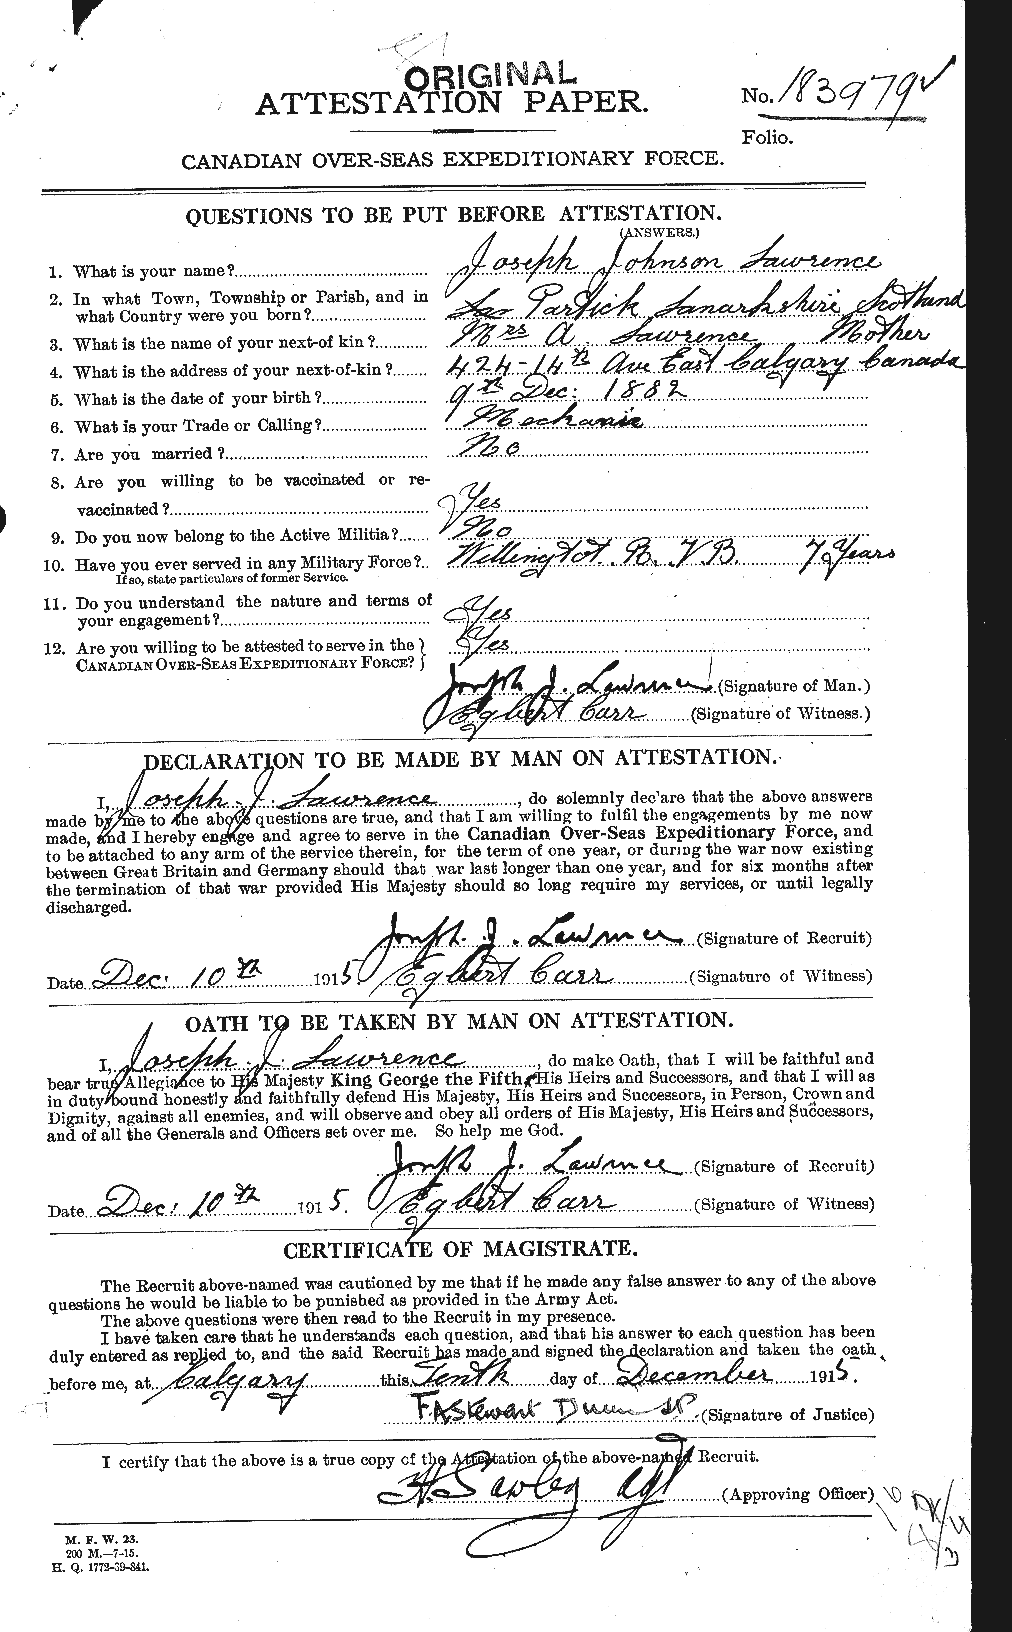 Personnel Records of the First World War - CEF 452401a